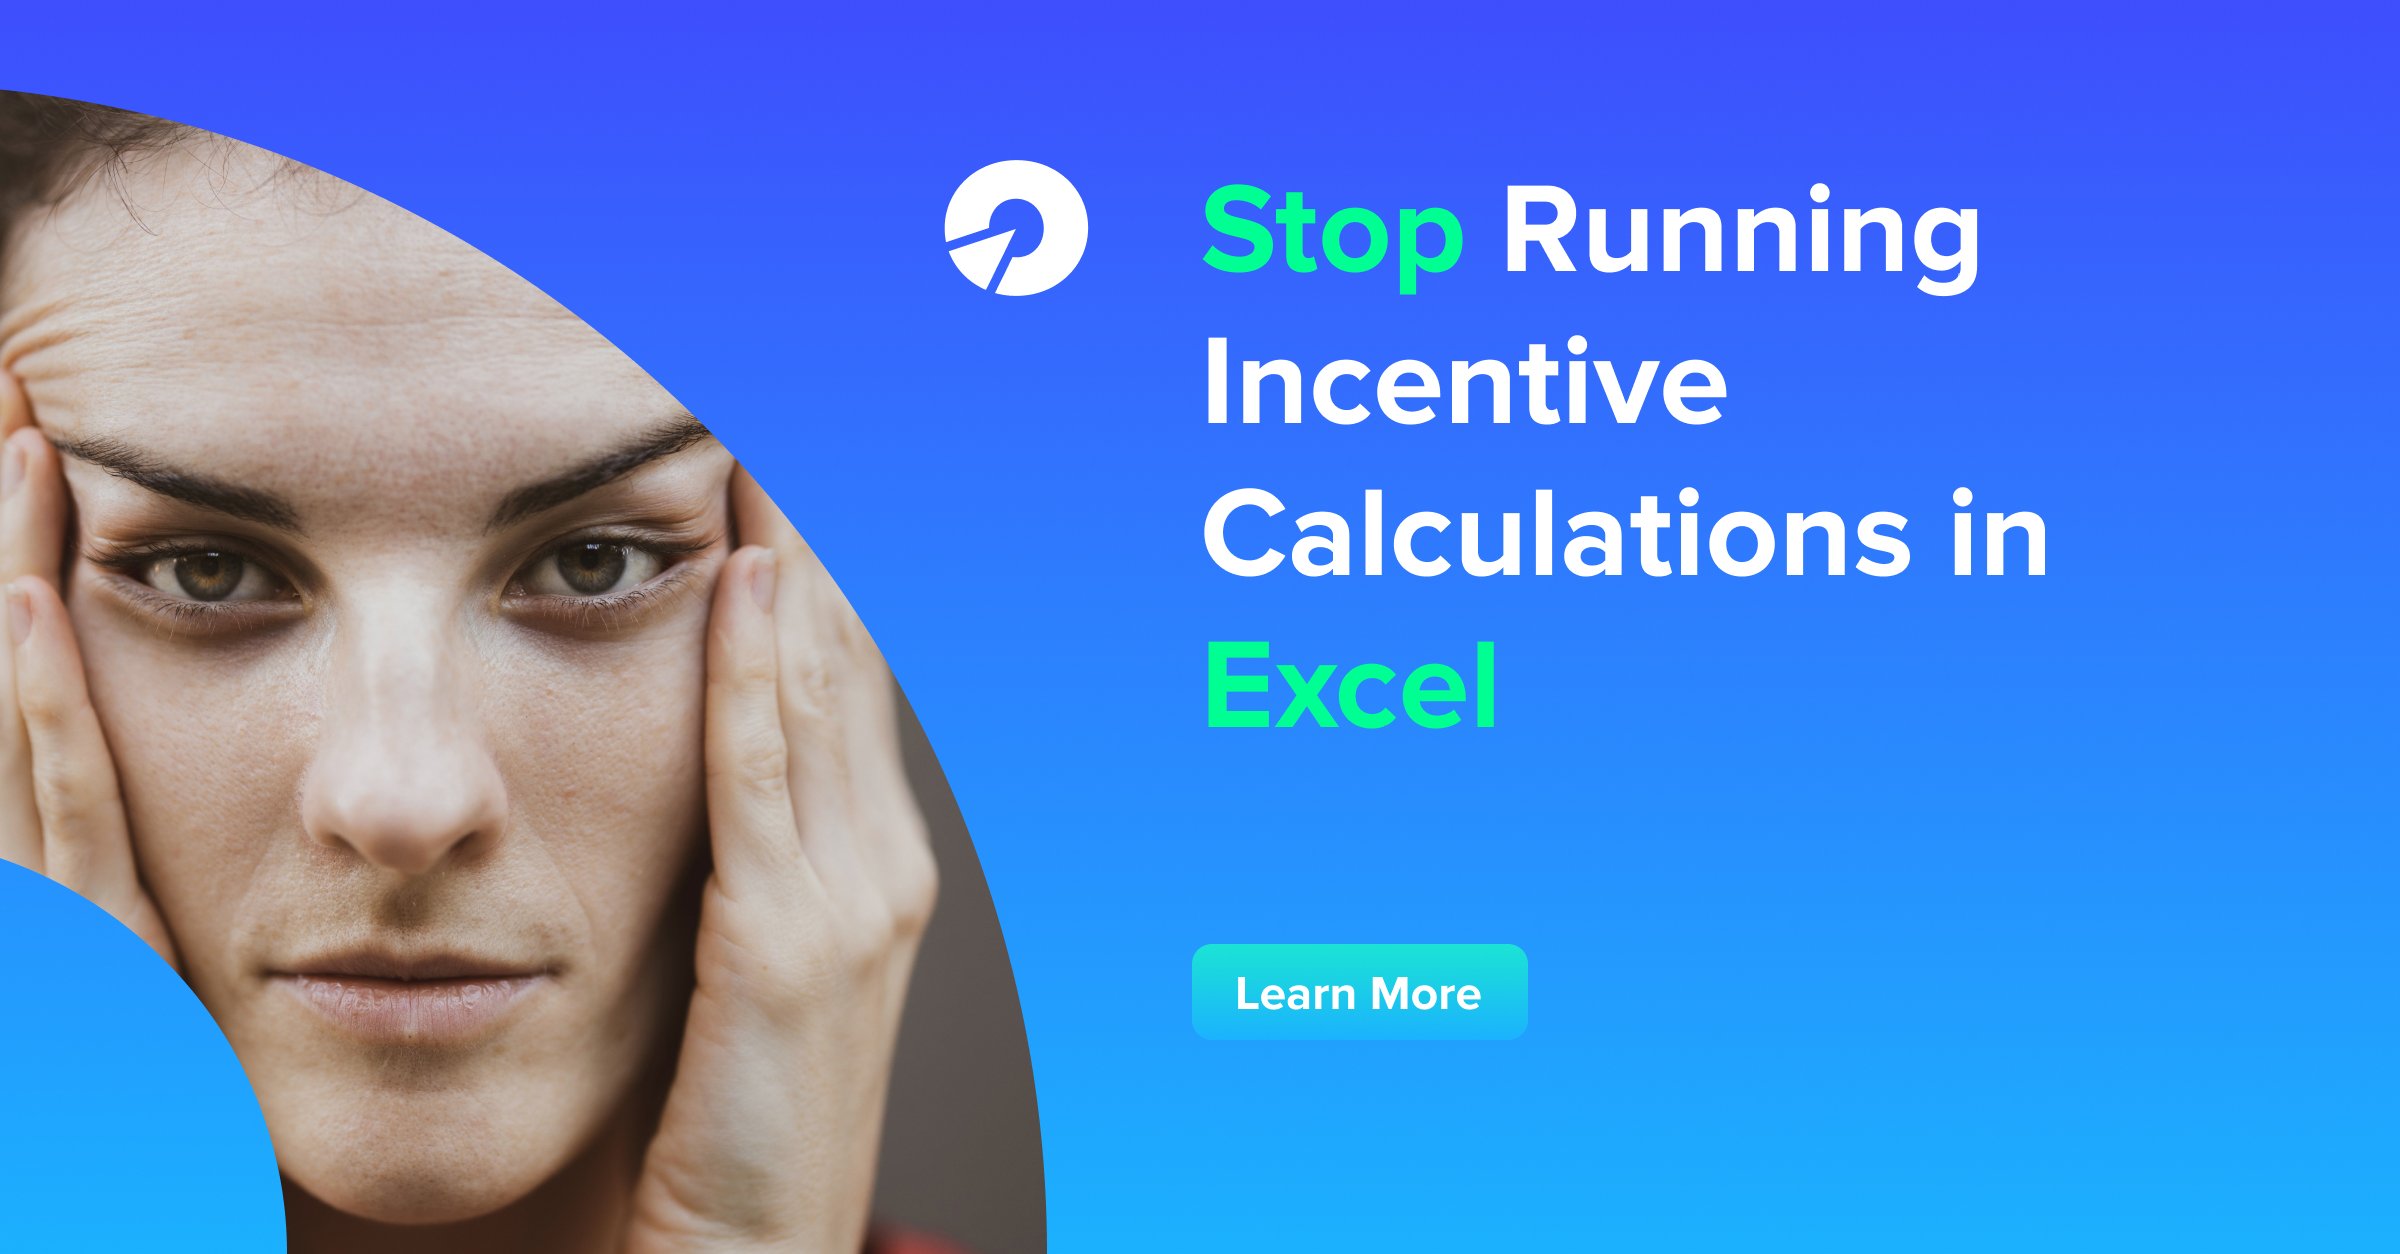 Stop Running Incentive Calculations in Excel